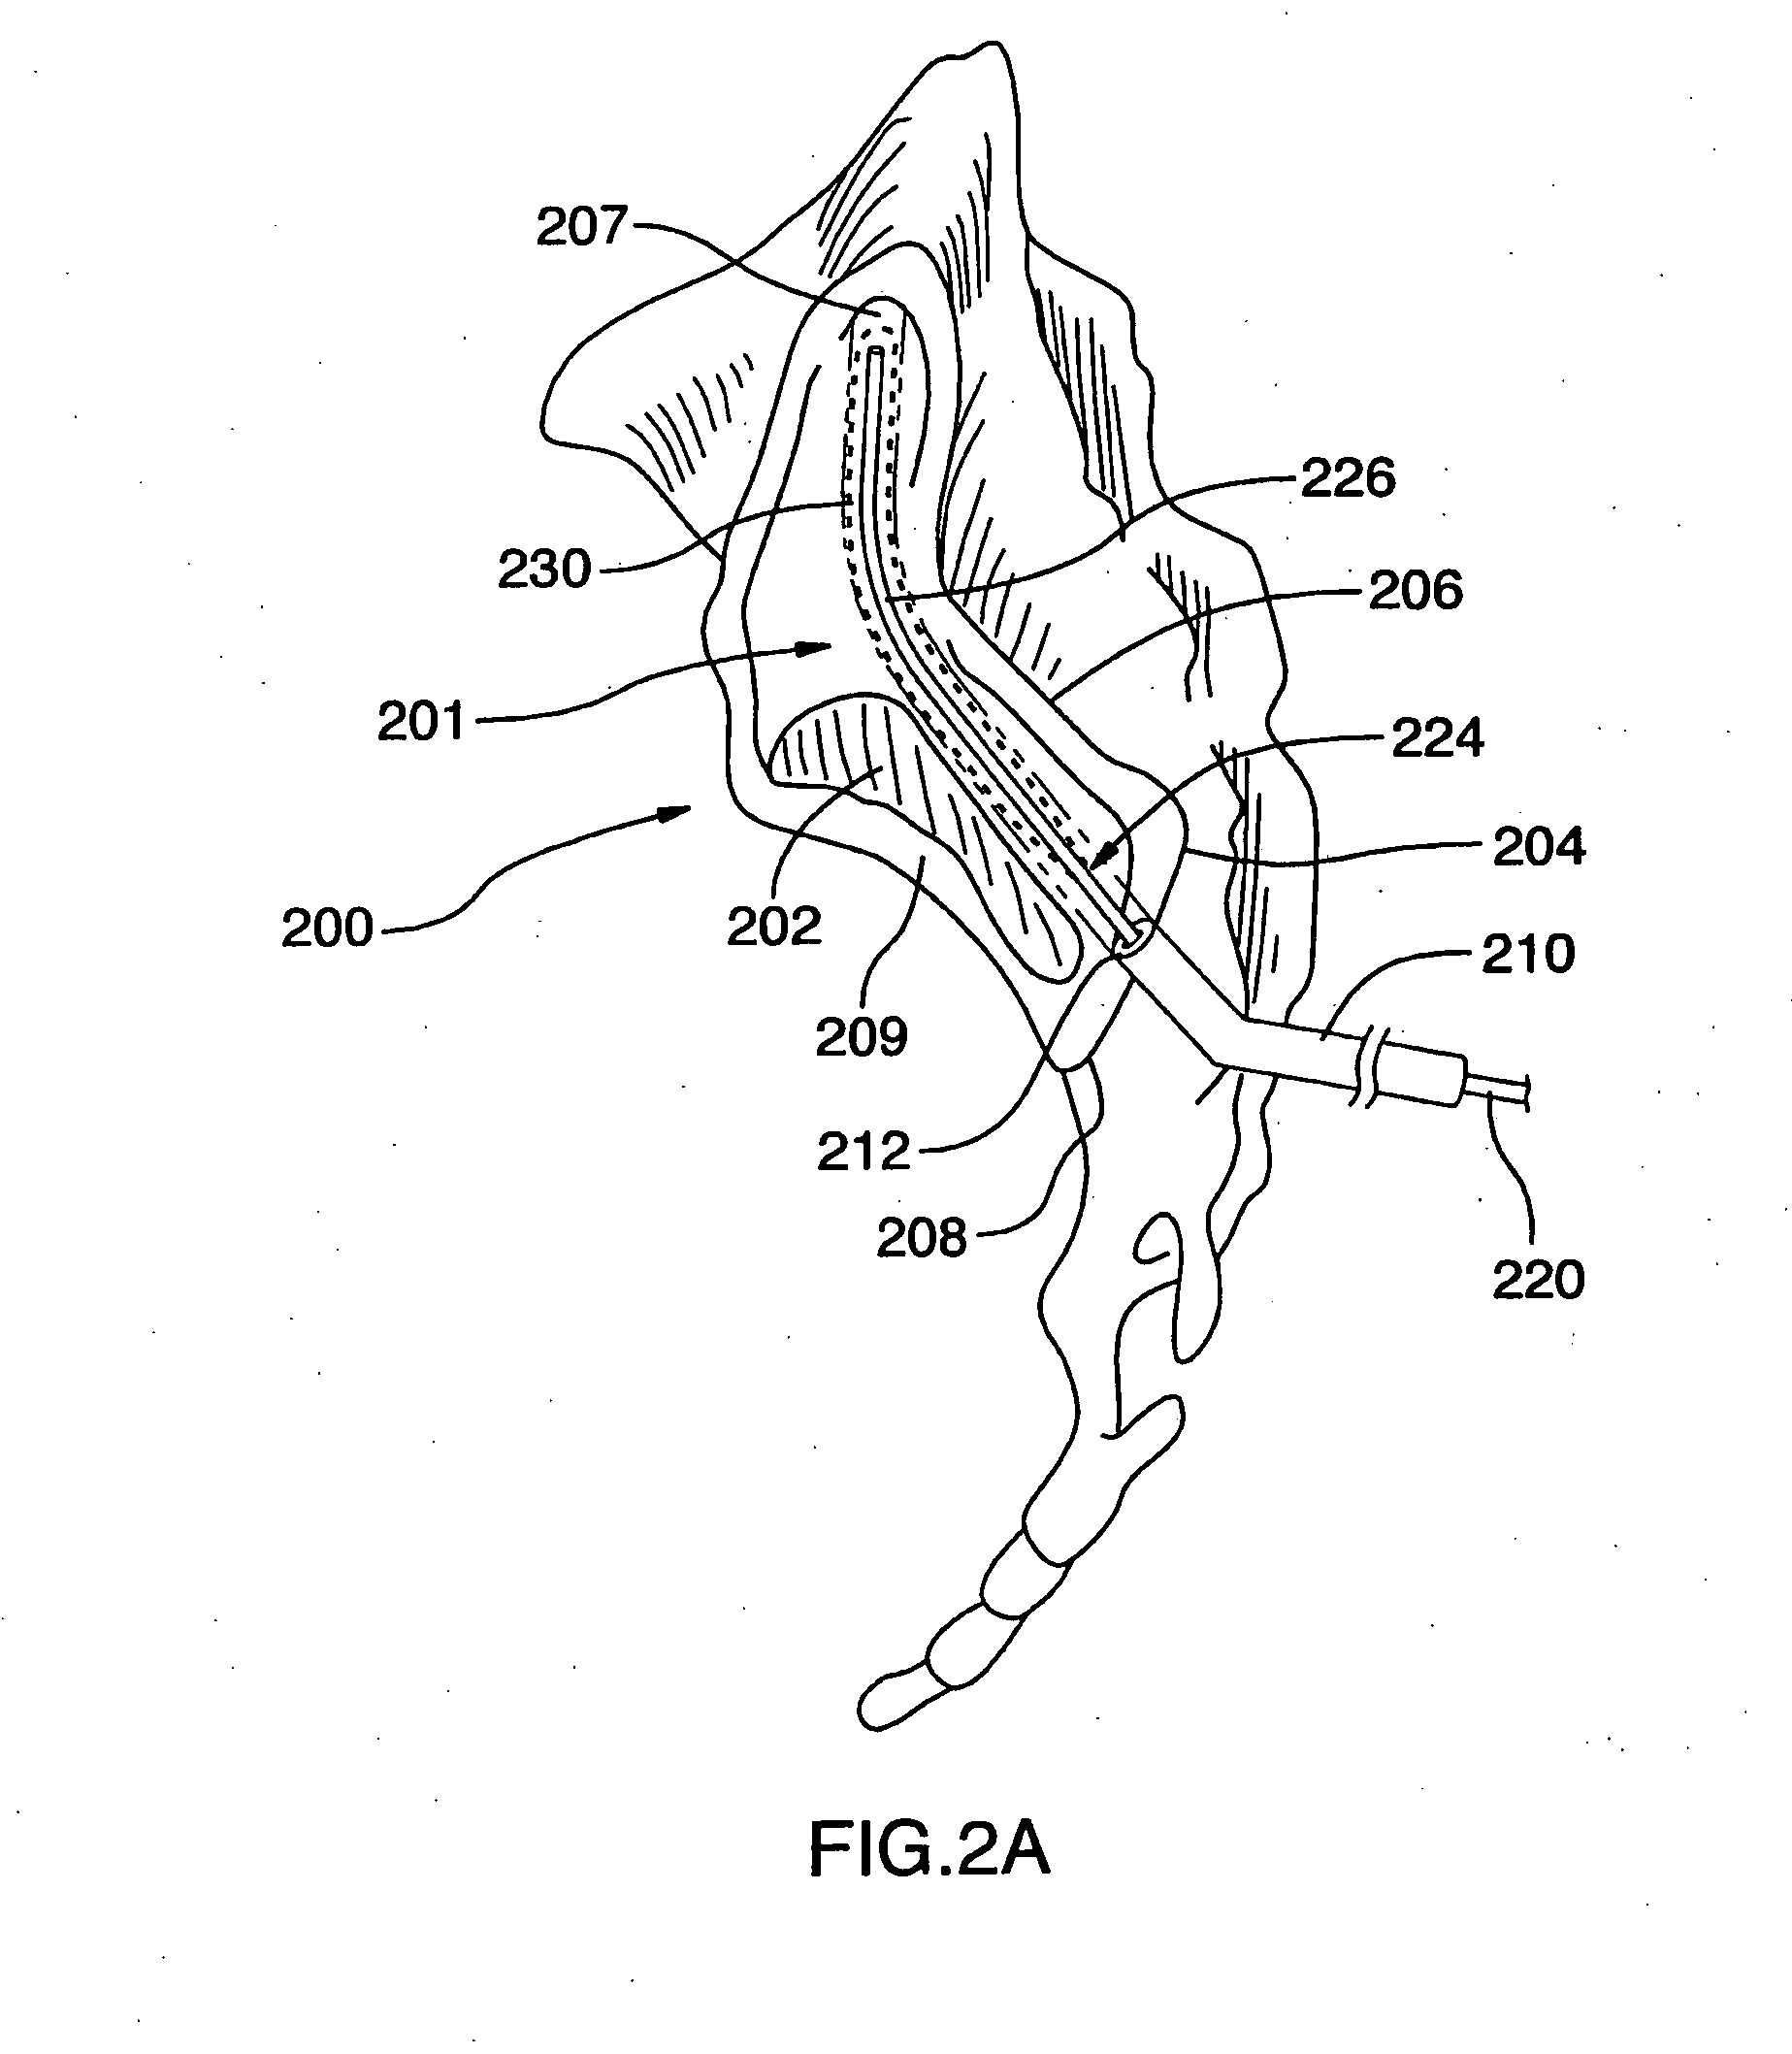 Methods of treating the sacroilac region of a patient's body